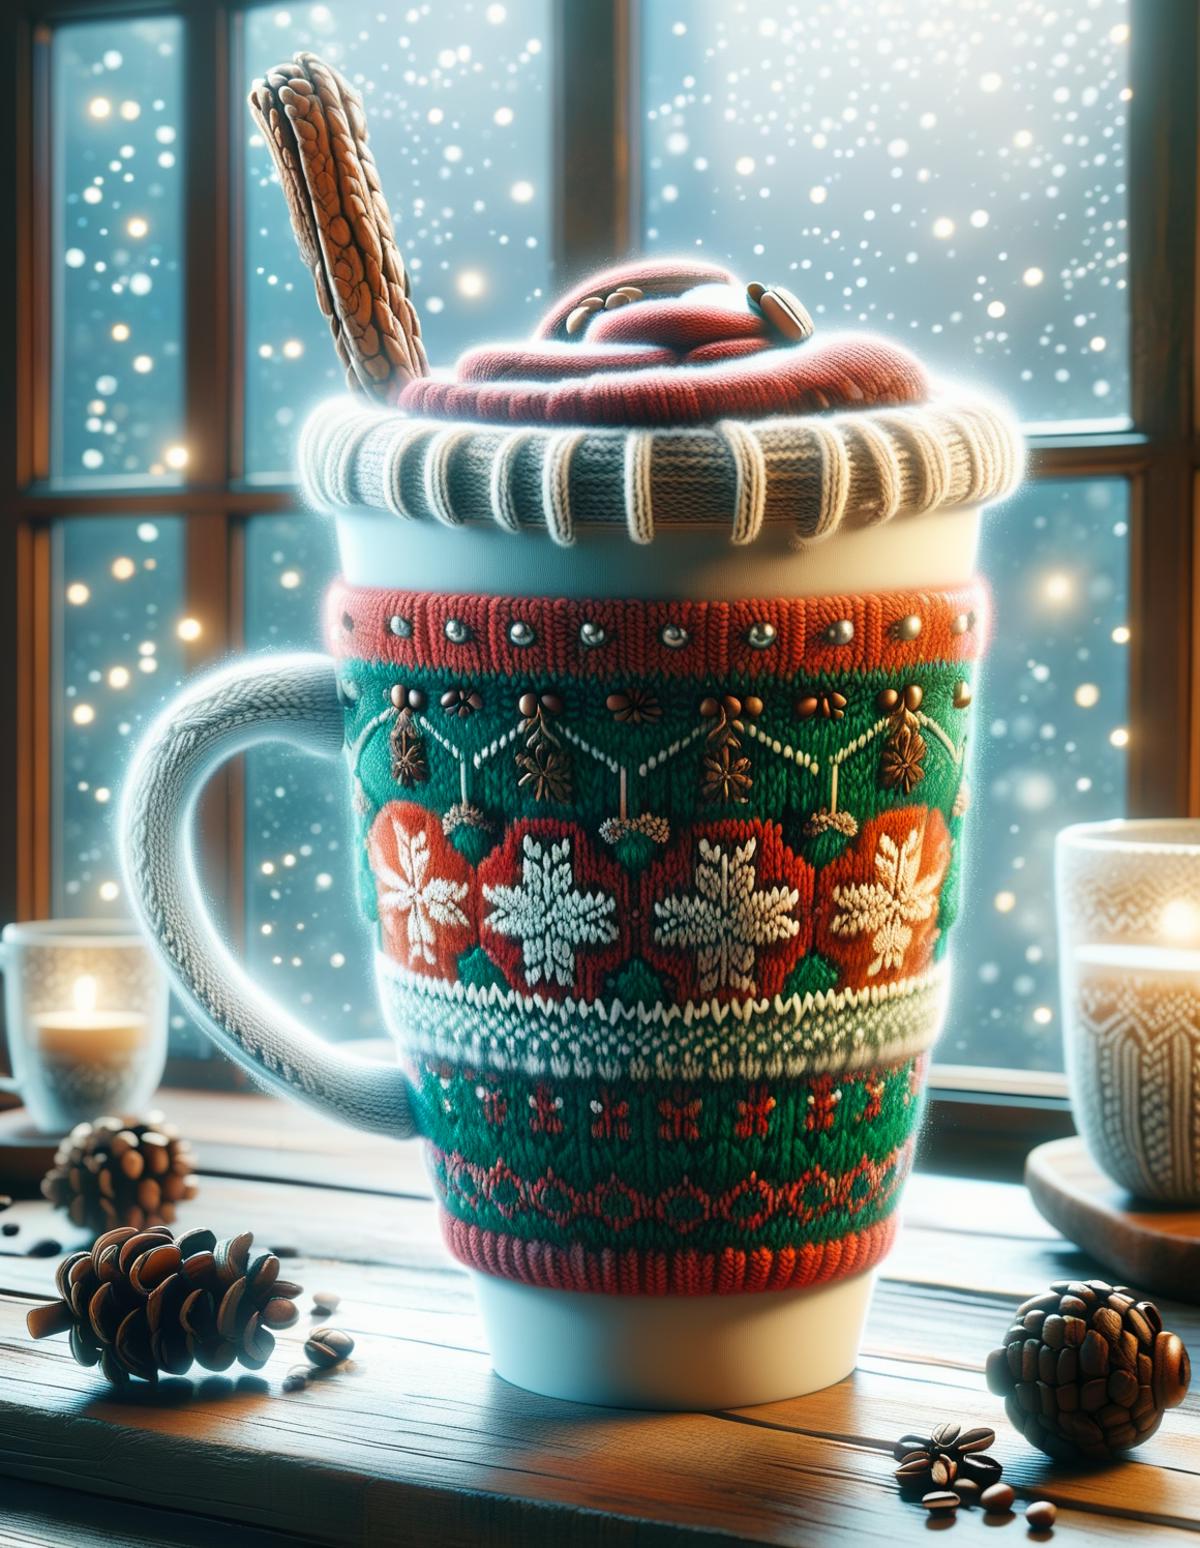 A cup of hot chocolate with marshmallows and sprinkles, placed in front of a window with a snowy scene.